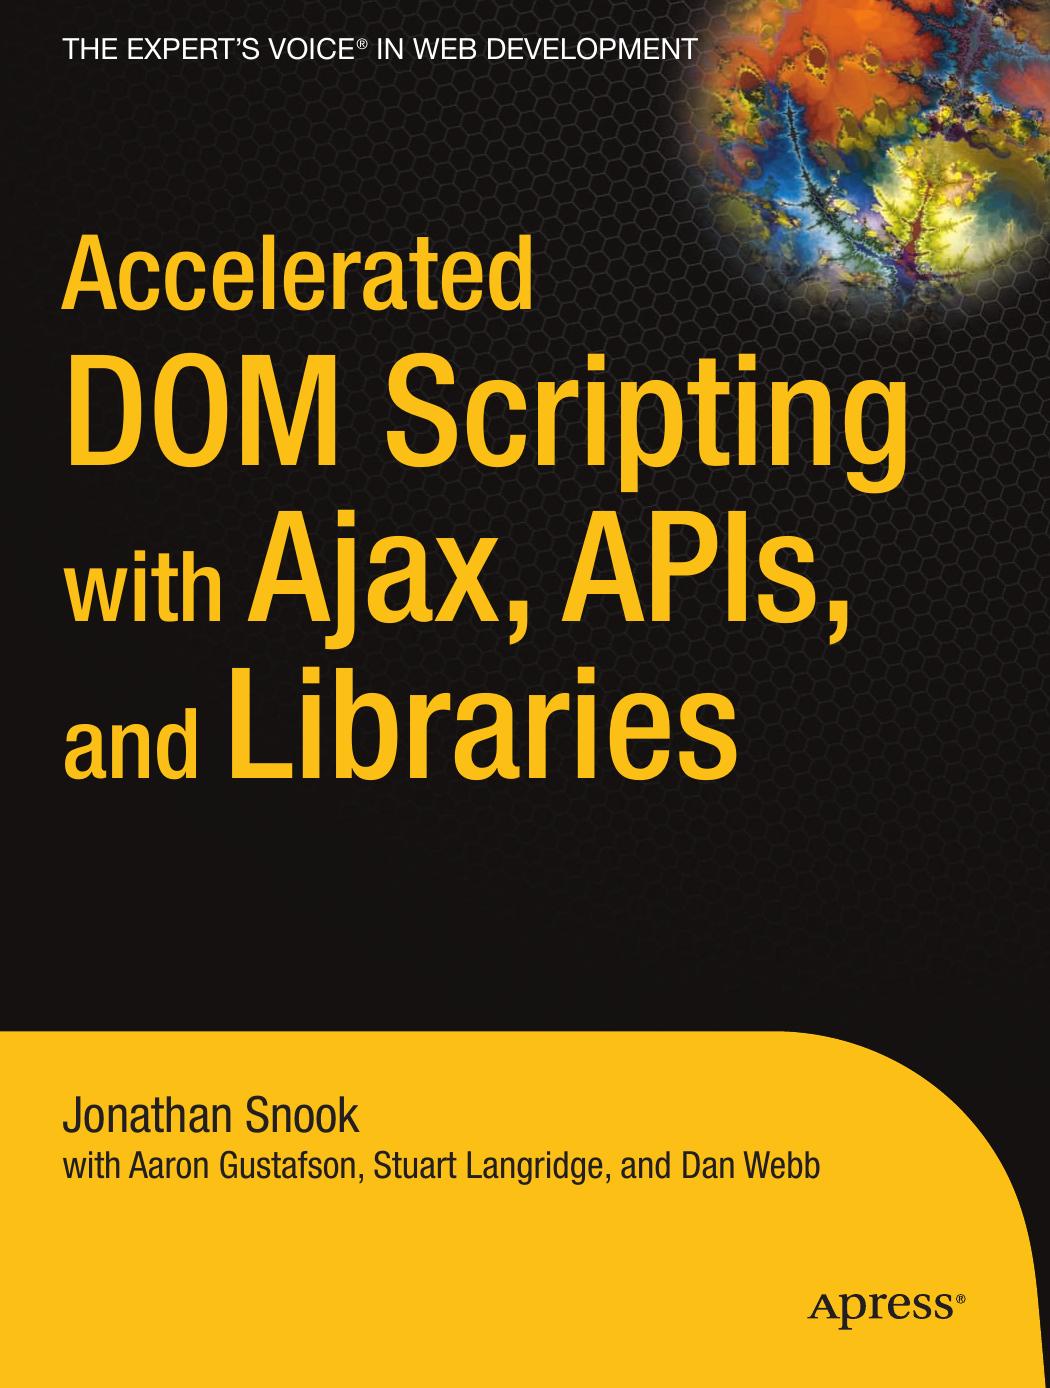 Accelerated DOM Scripting With Ajax, APIs, and Libraries